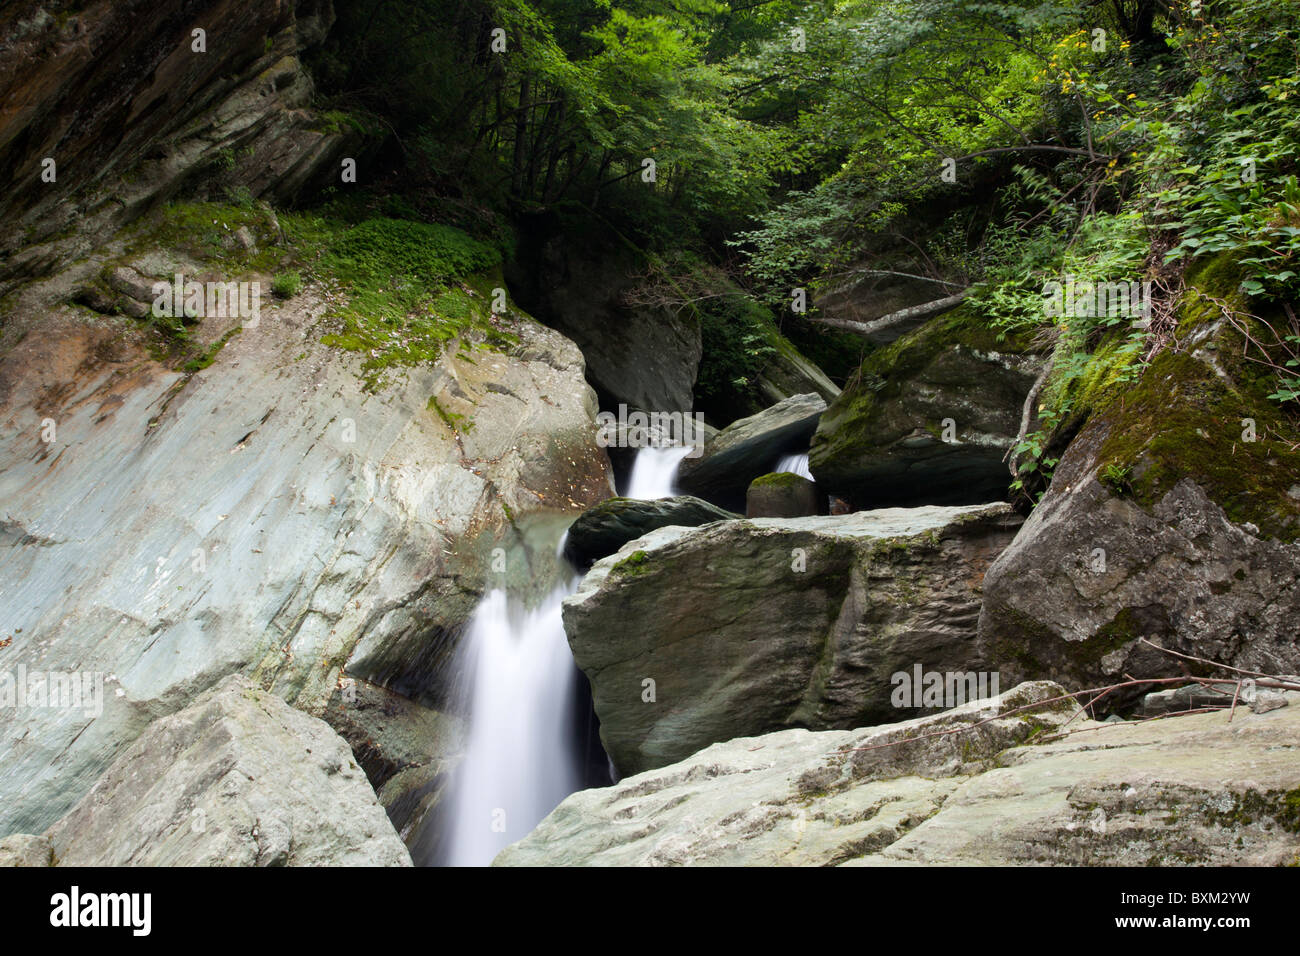 A waterfall tumbles and meanders among boulders in deep gorges in the Min Mountains in Sichuan in China. Stock Photo